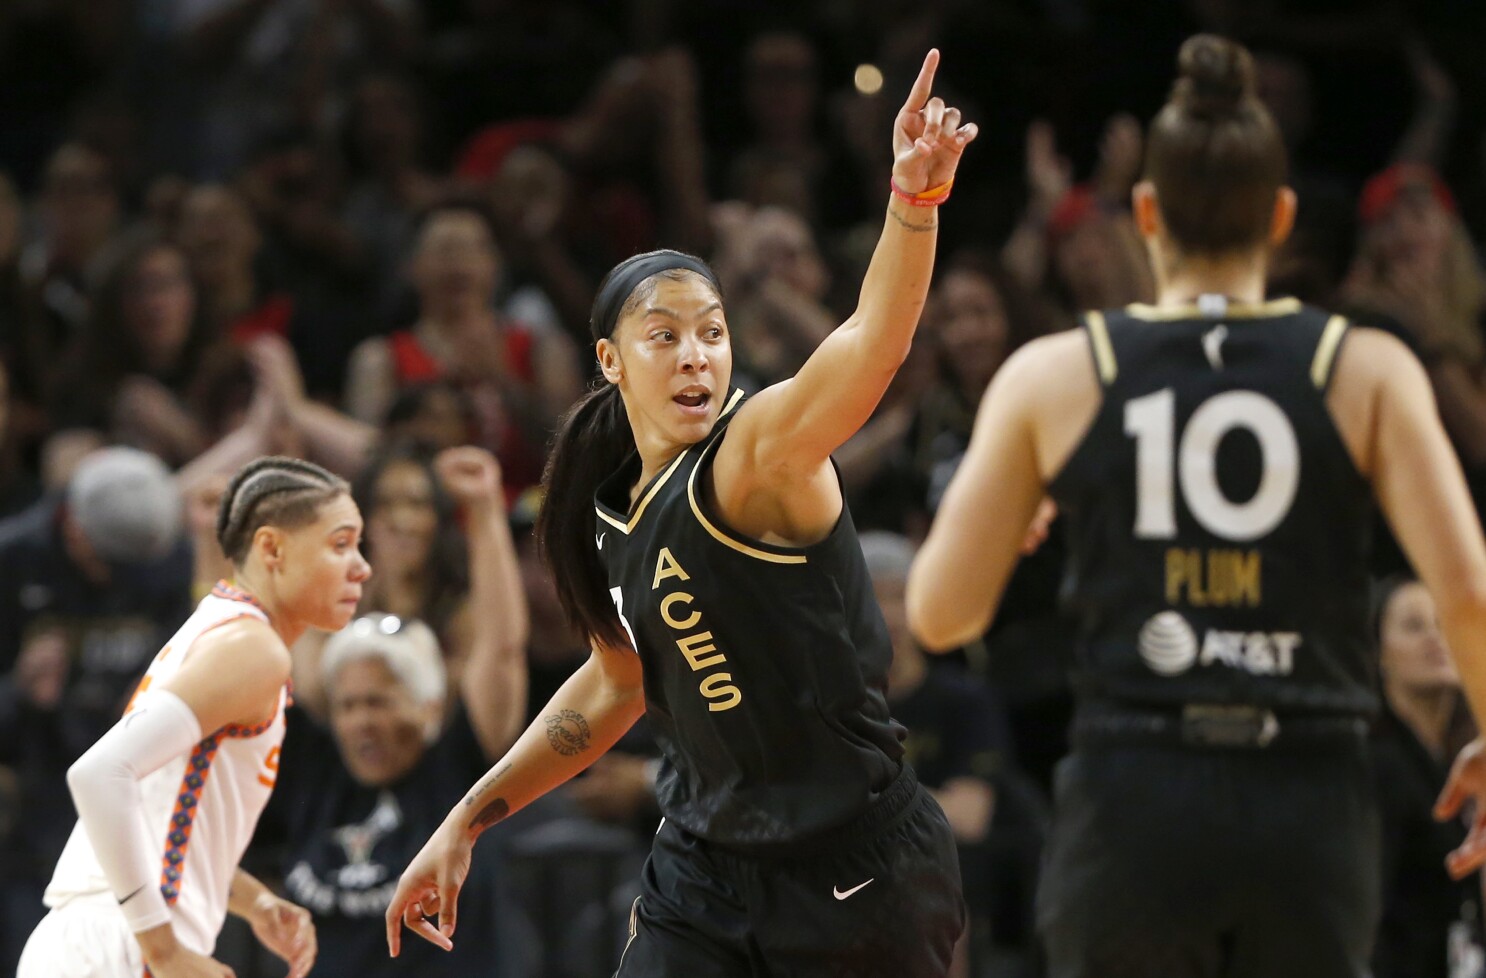 Las Vegas forward Candace Parker undergoes surgery for fracture in her foot